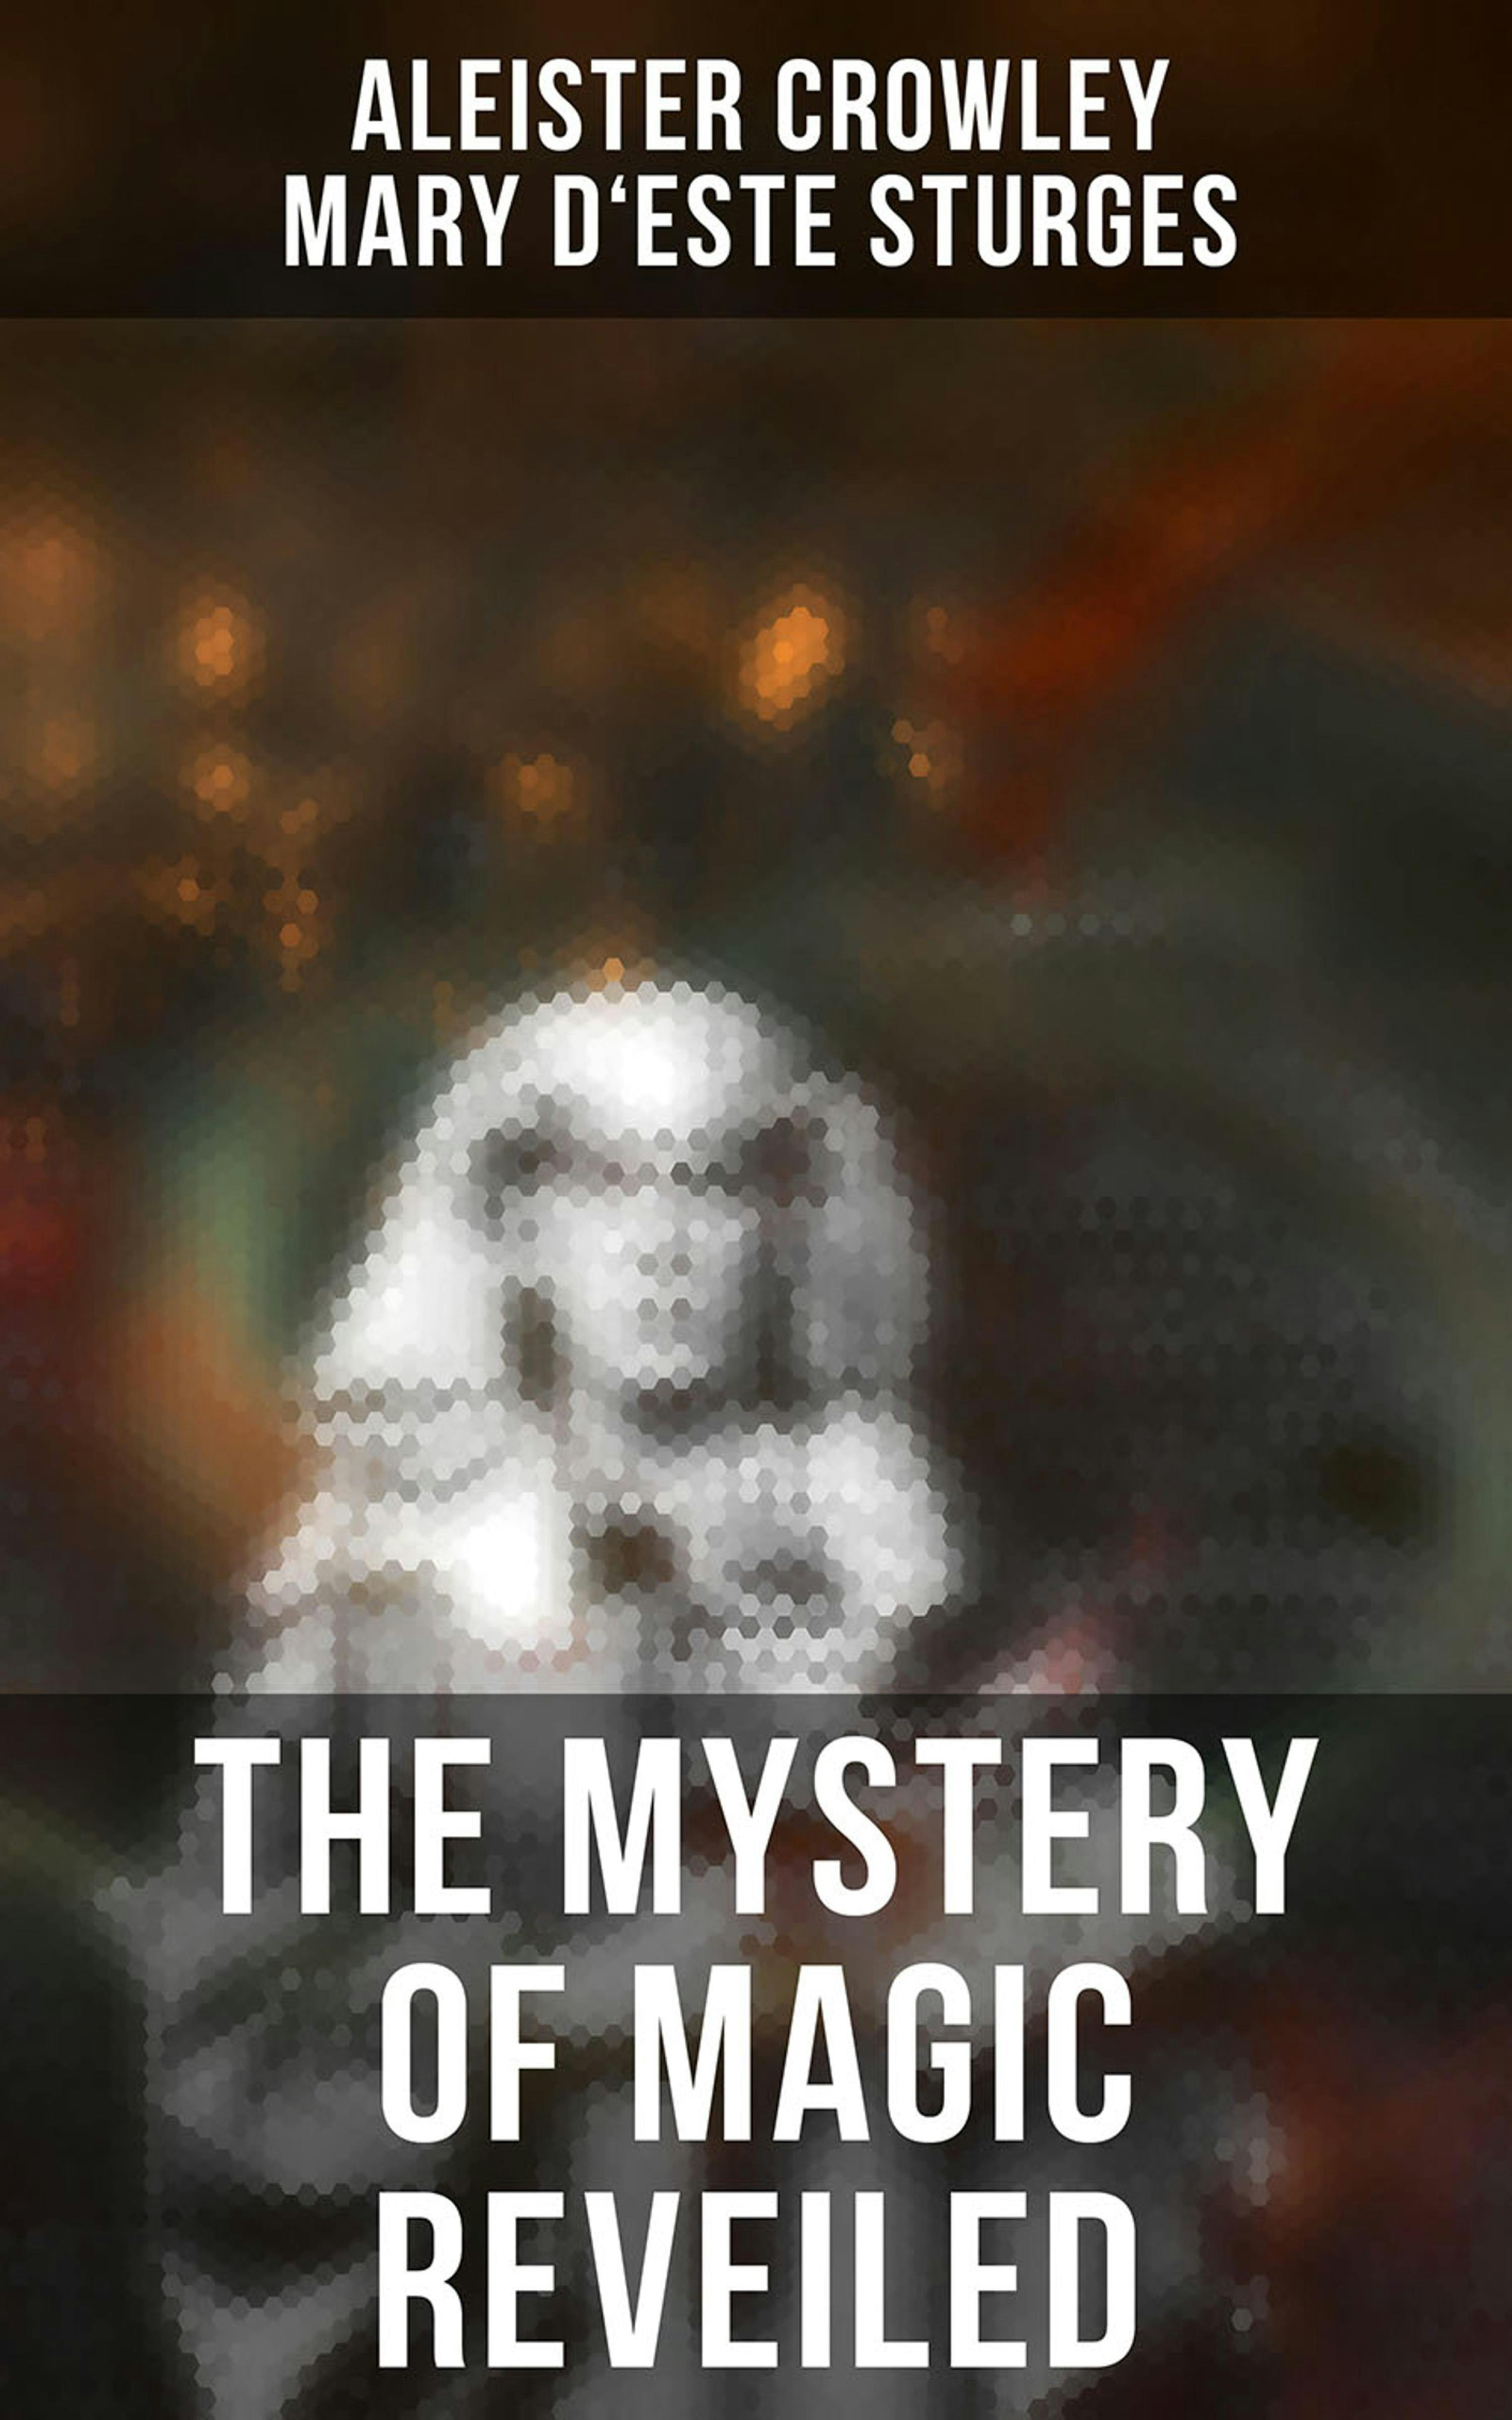 The Mystery of Magic Reveiled - Mary d'Este Sturges, Aleister Crowley